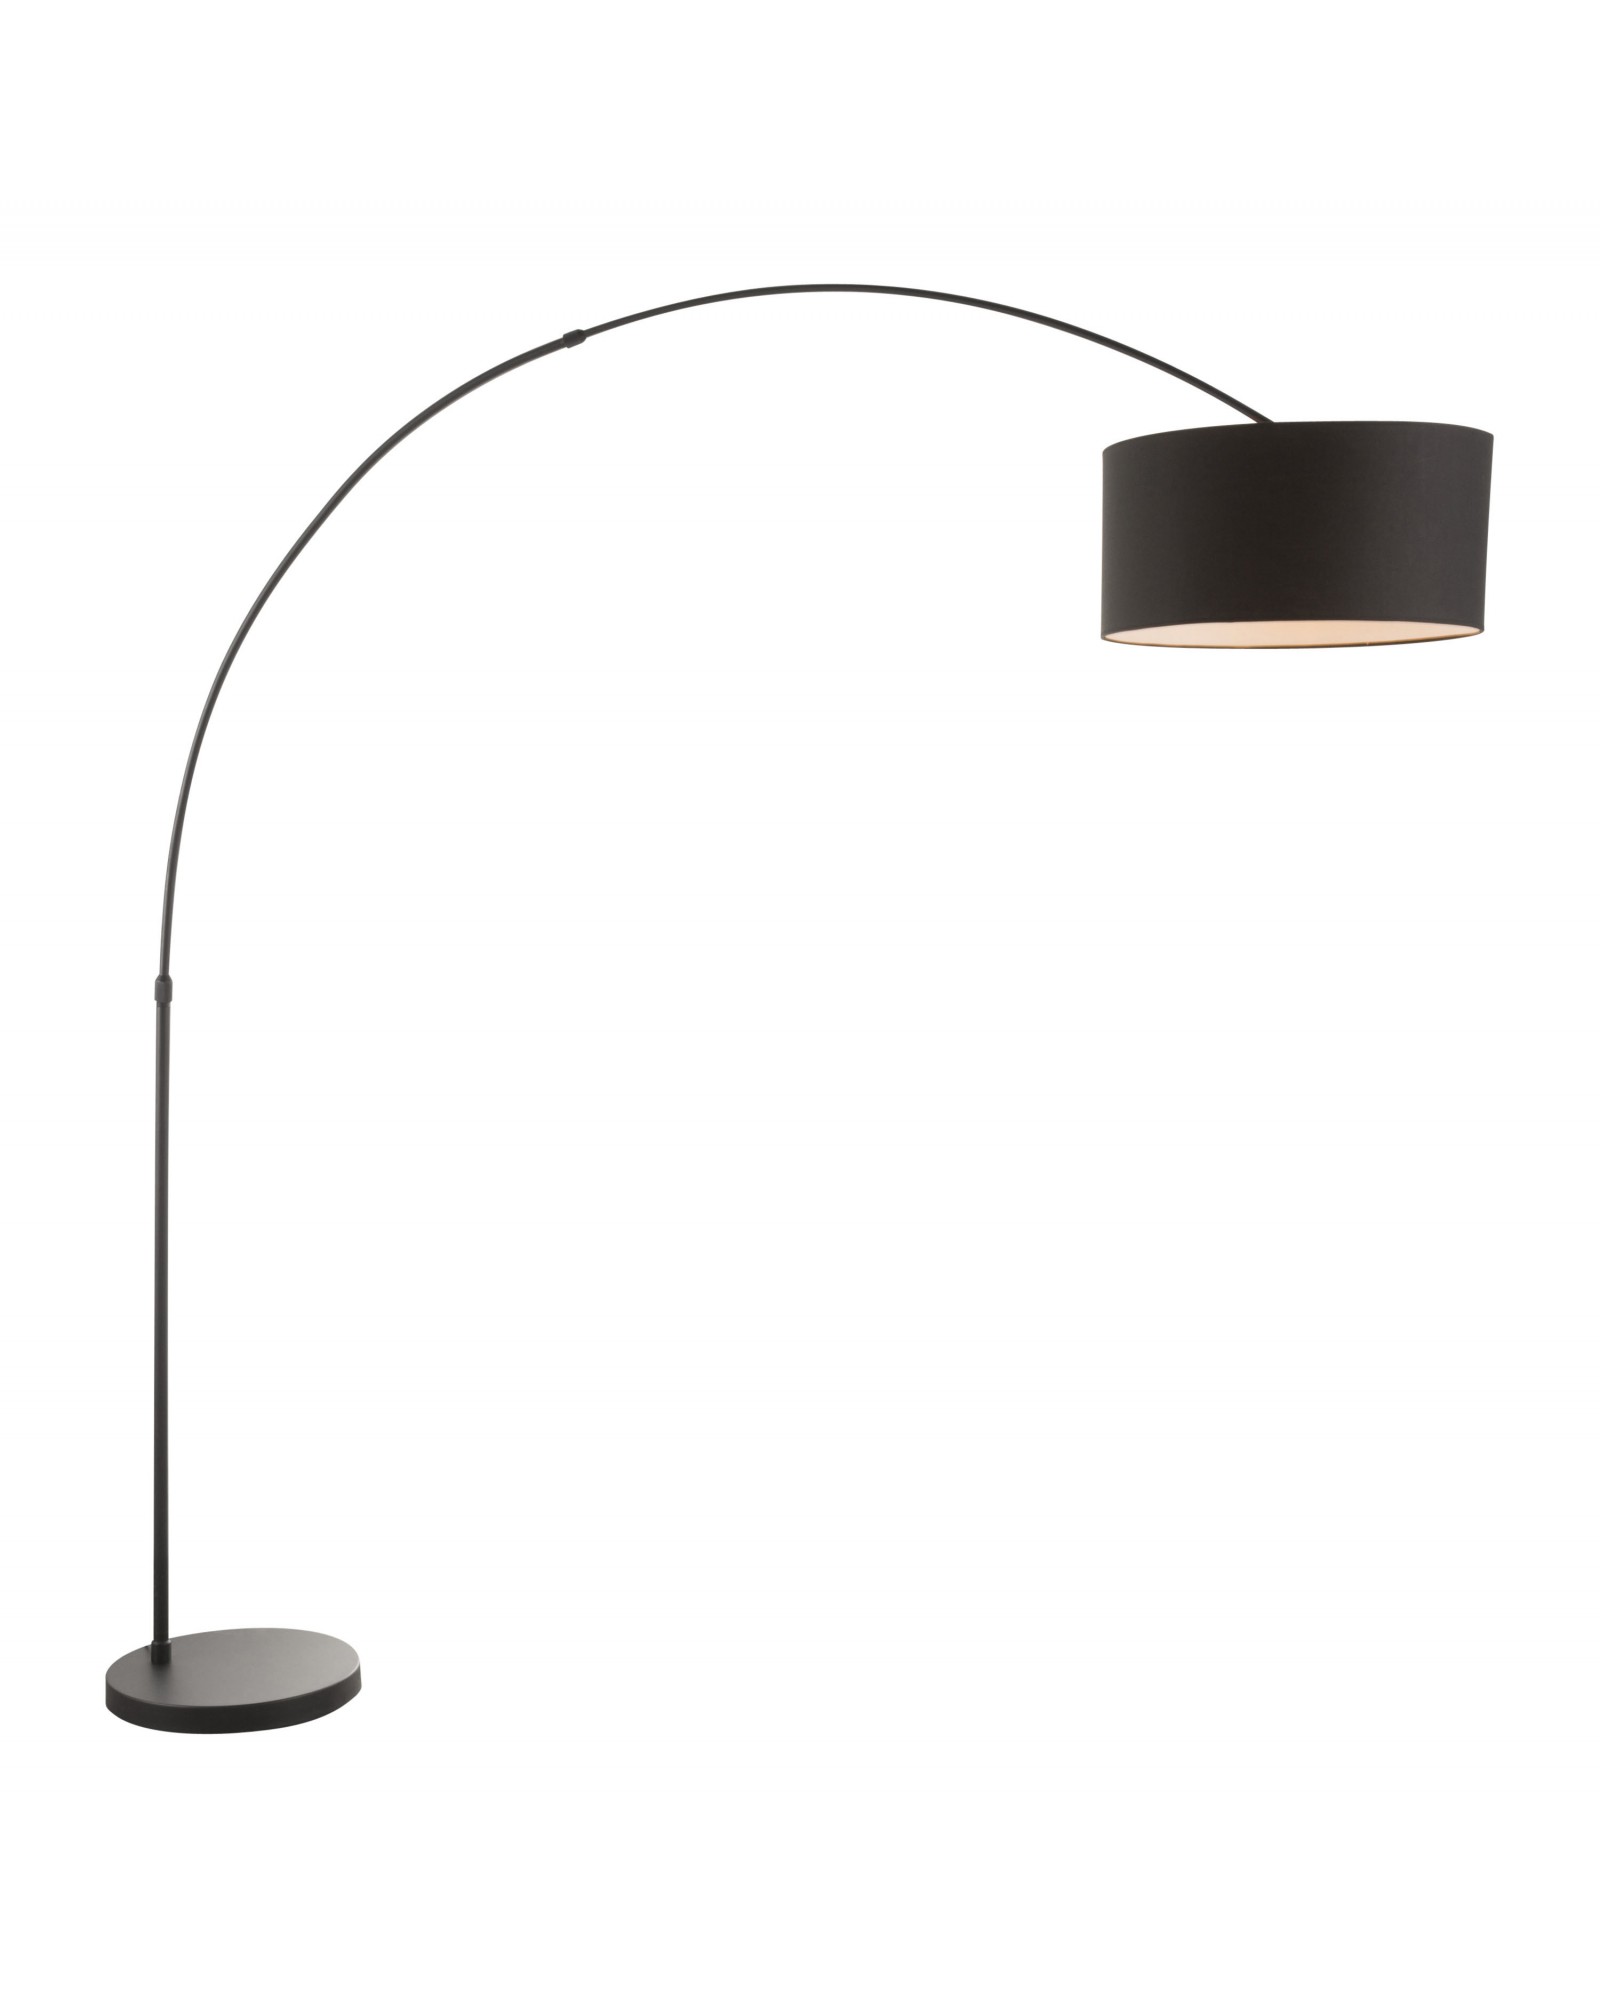 Salon Contemporary Floor Lamp with Black Base and Black Shade